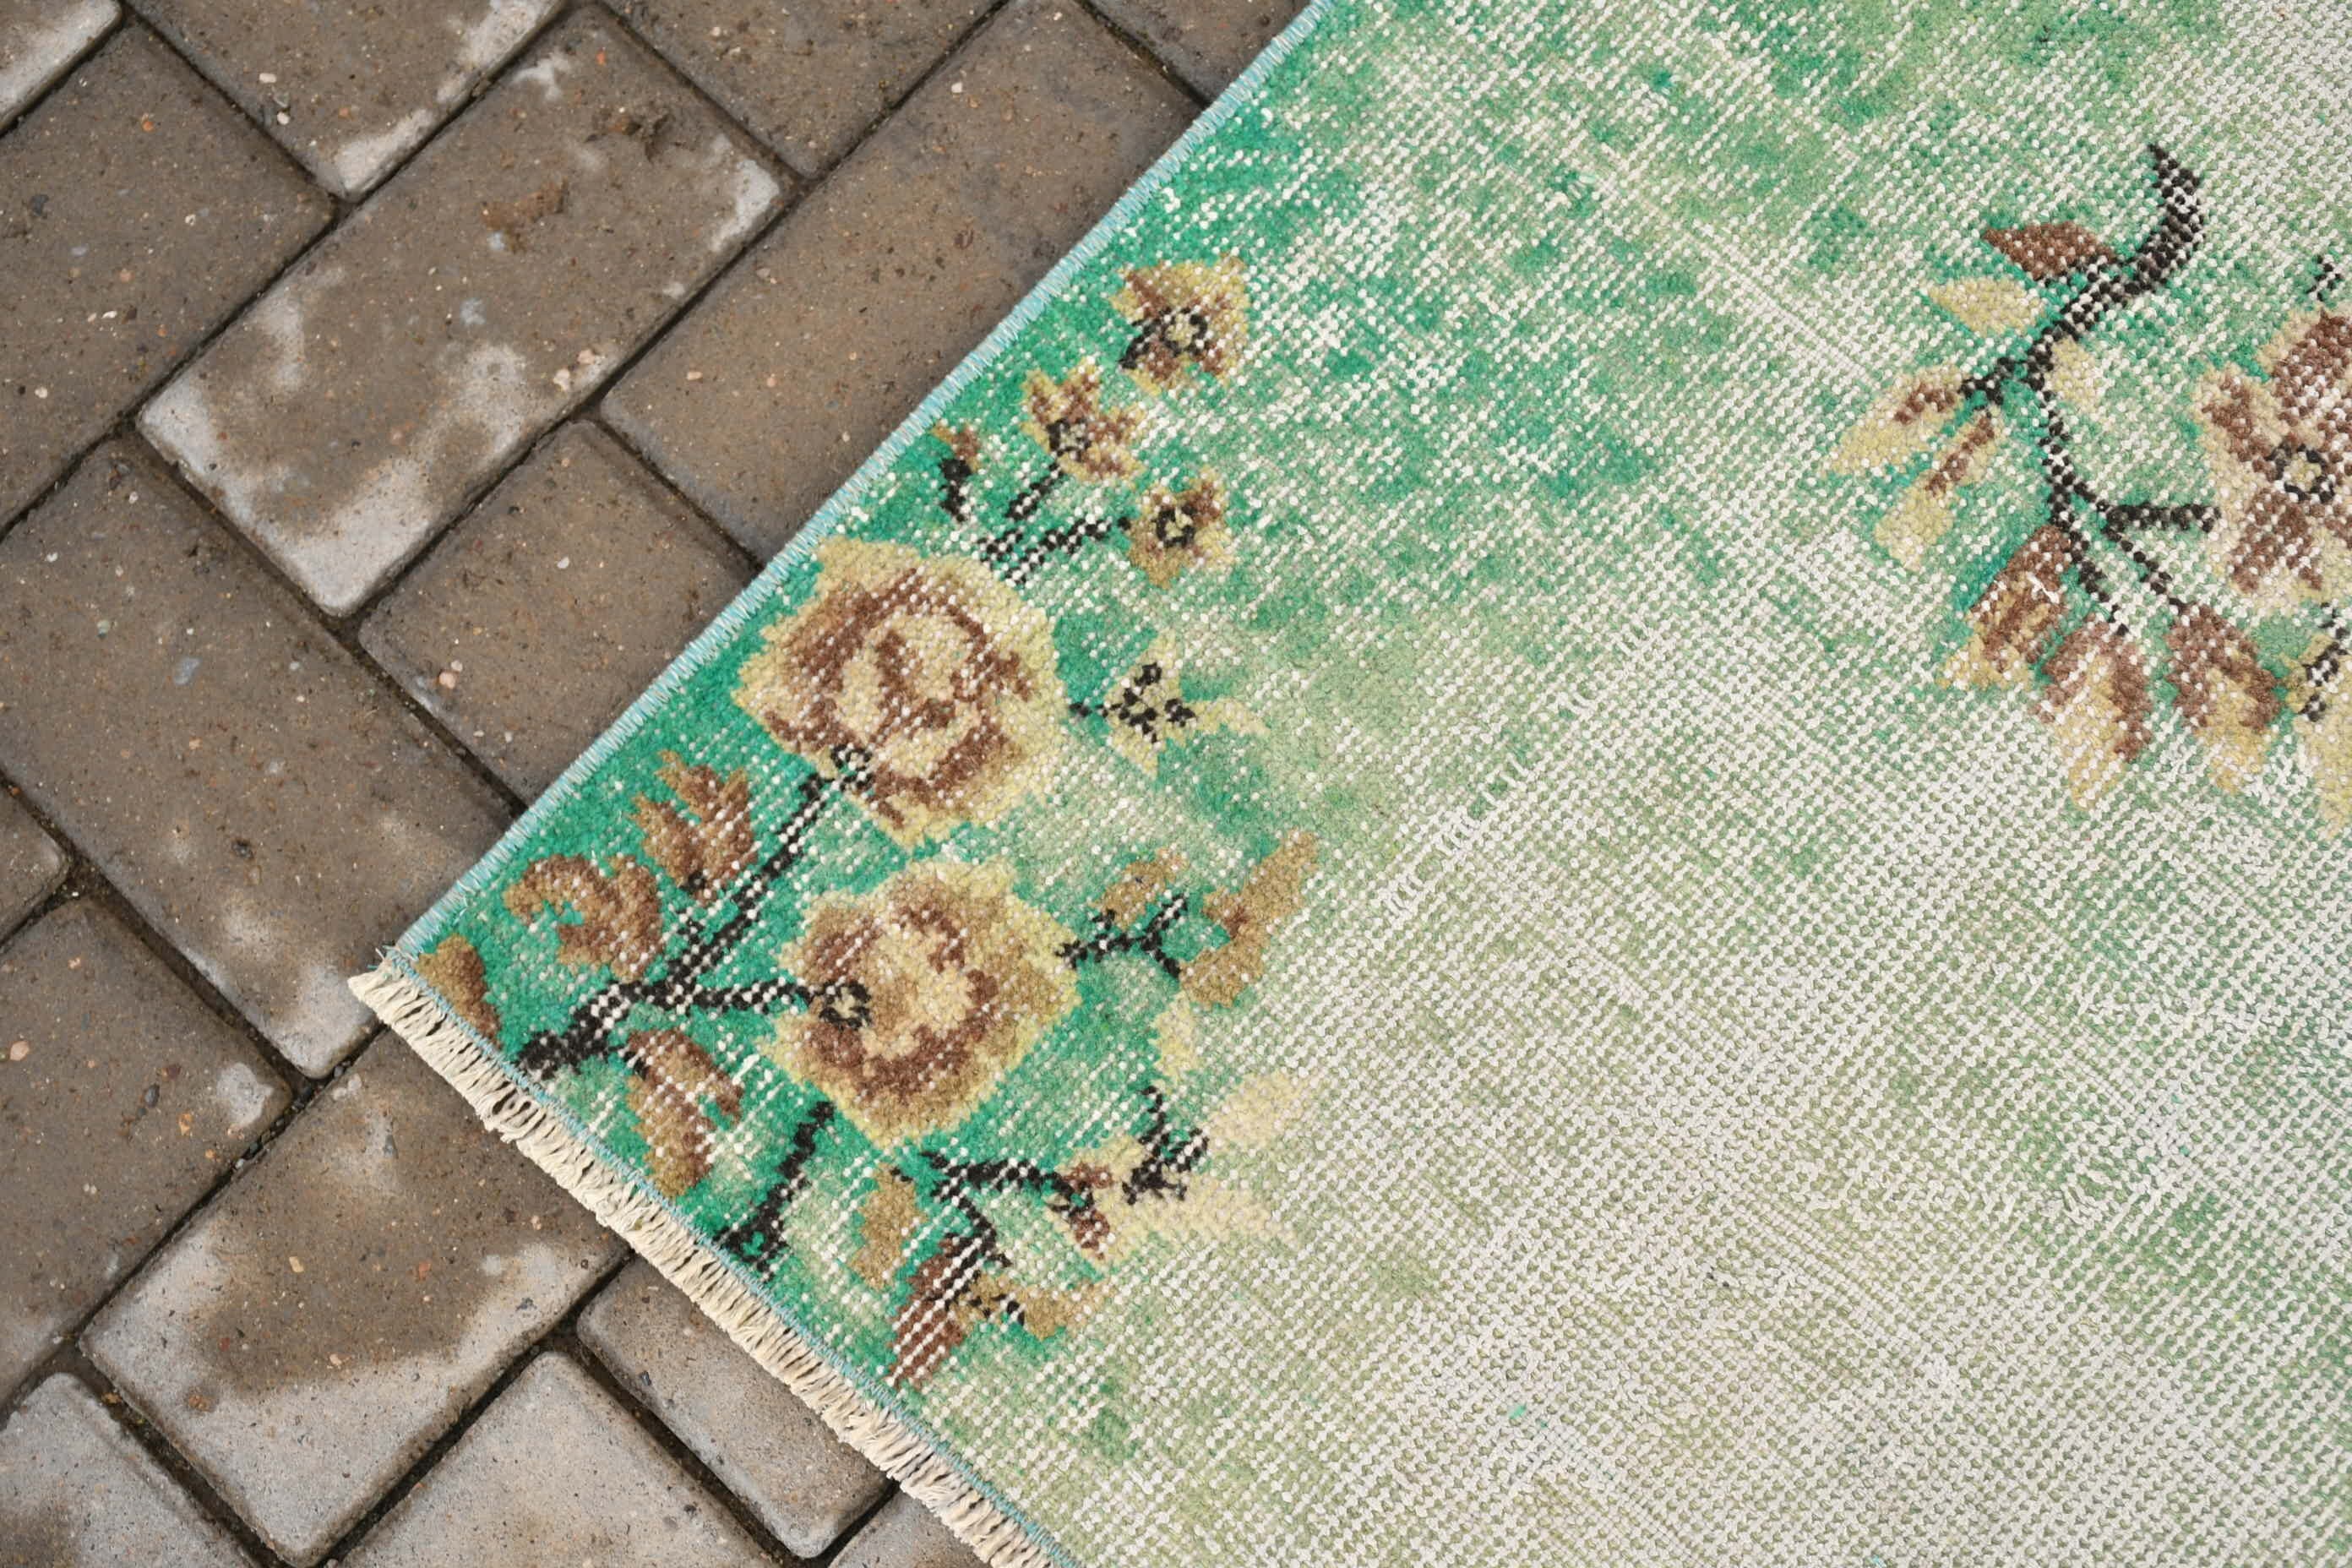 Green Kitchen Rugs, Bedroom Rug, Vintage Rug, 3.9x6 ft Accent Rug, Turkish Rugs, Rugs for Entry, Home Decor Rug, Aztec Rug, Moroccan Rug